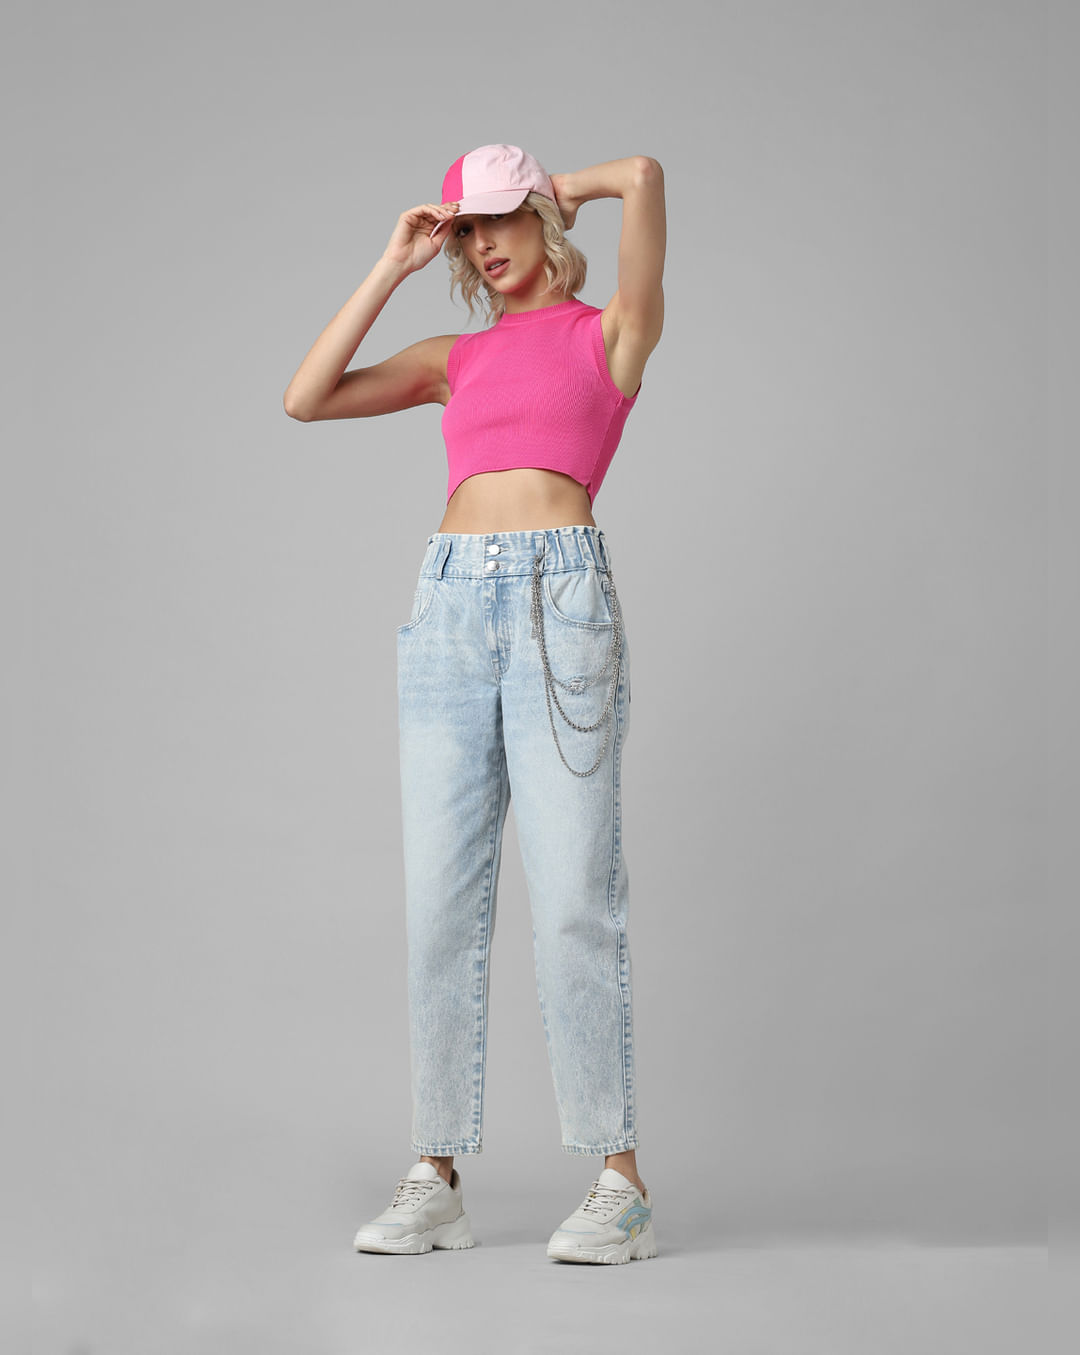 ASOS Design Baggy Jeans with Distressed Details in Pink Acid Wash